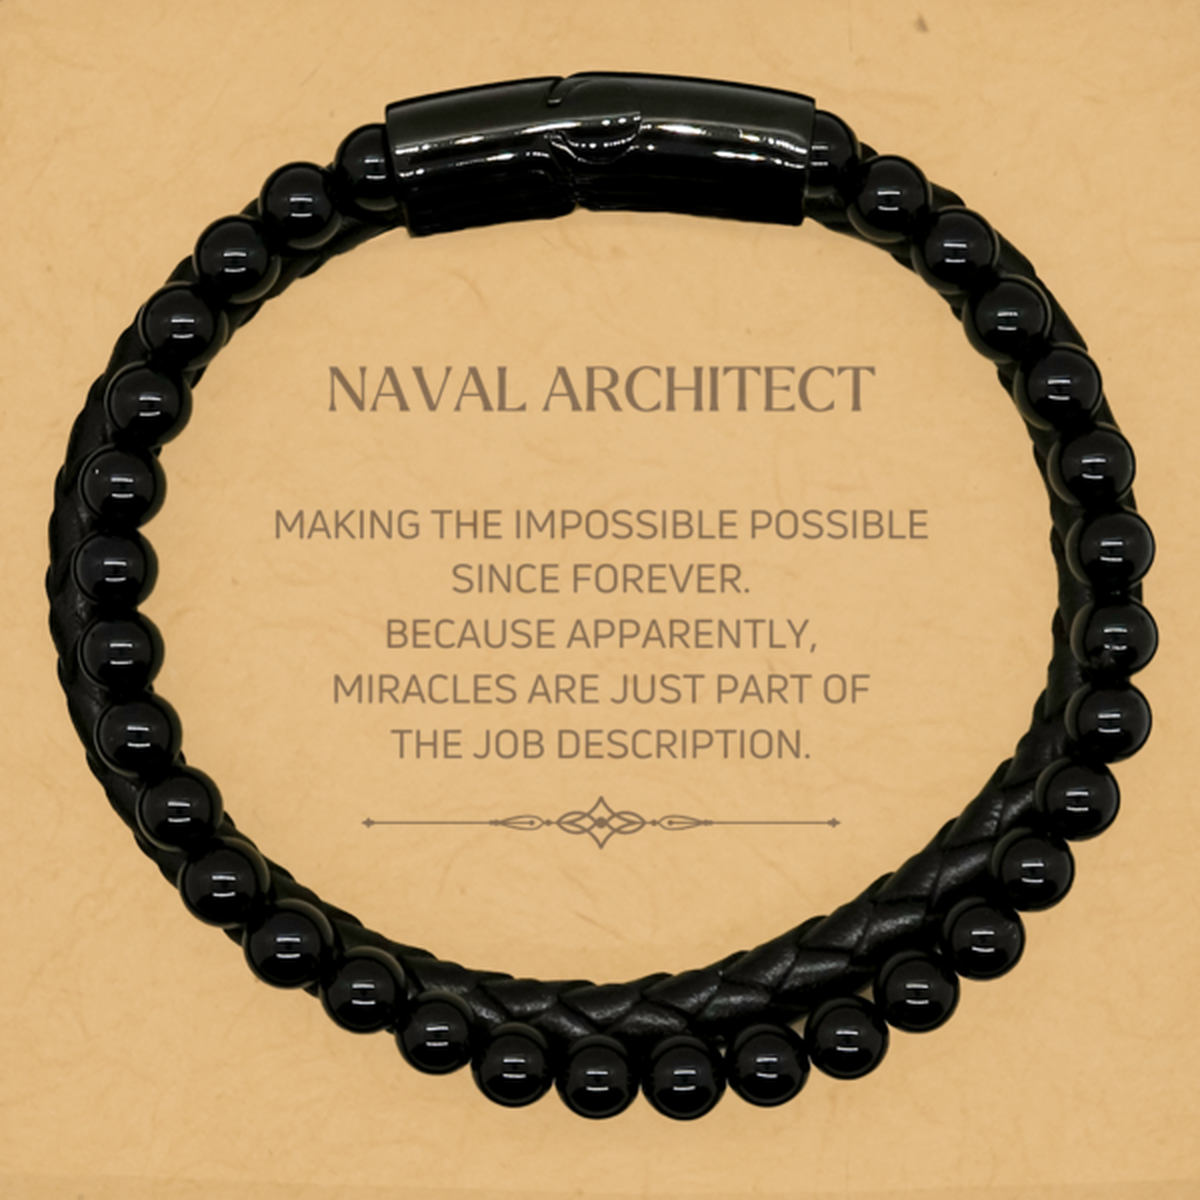 Funny Naval Architect Gifts, Miracles are just part of the job description, Inspirational Birthday Stone Leather Bracelets For Naval Architect, Men, Women, Coworkers, Friends, Boss